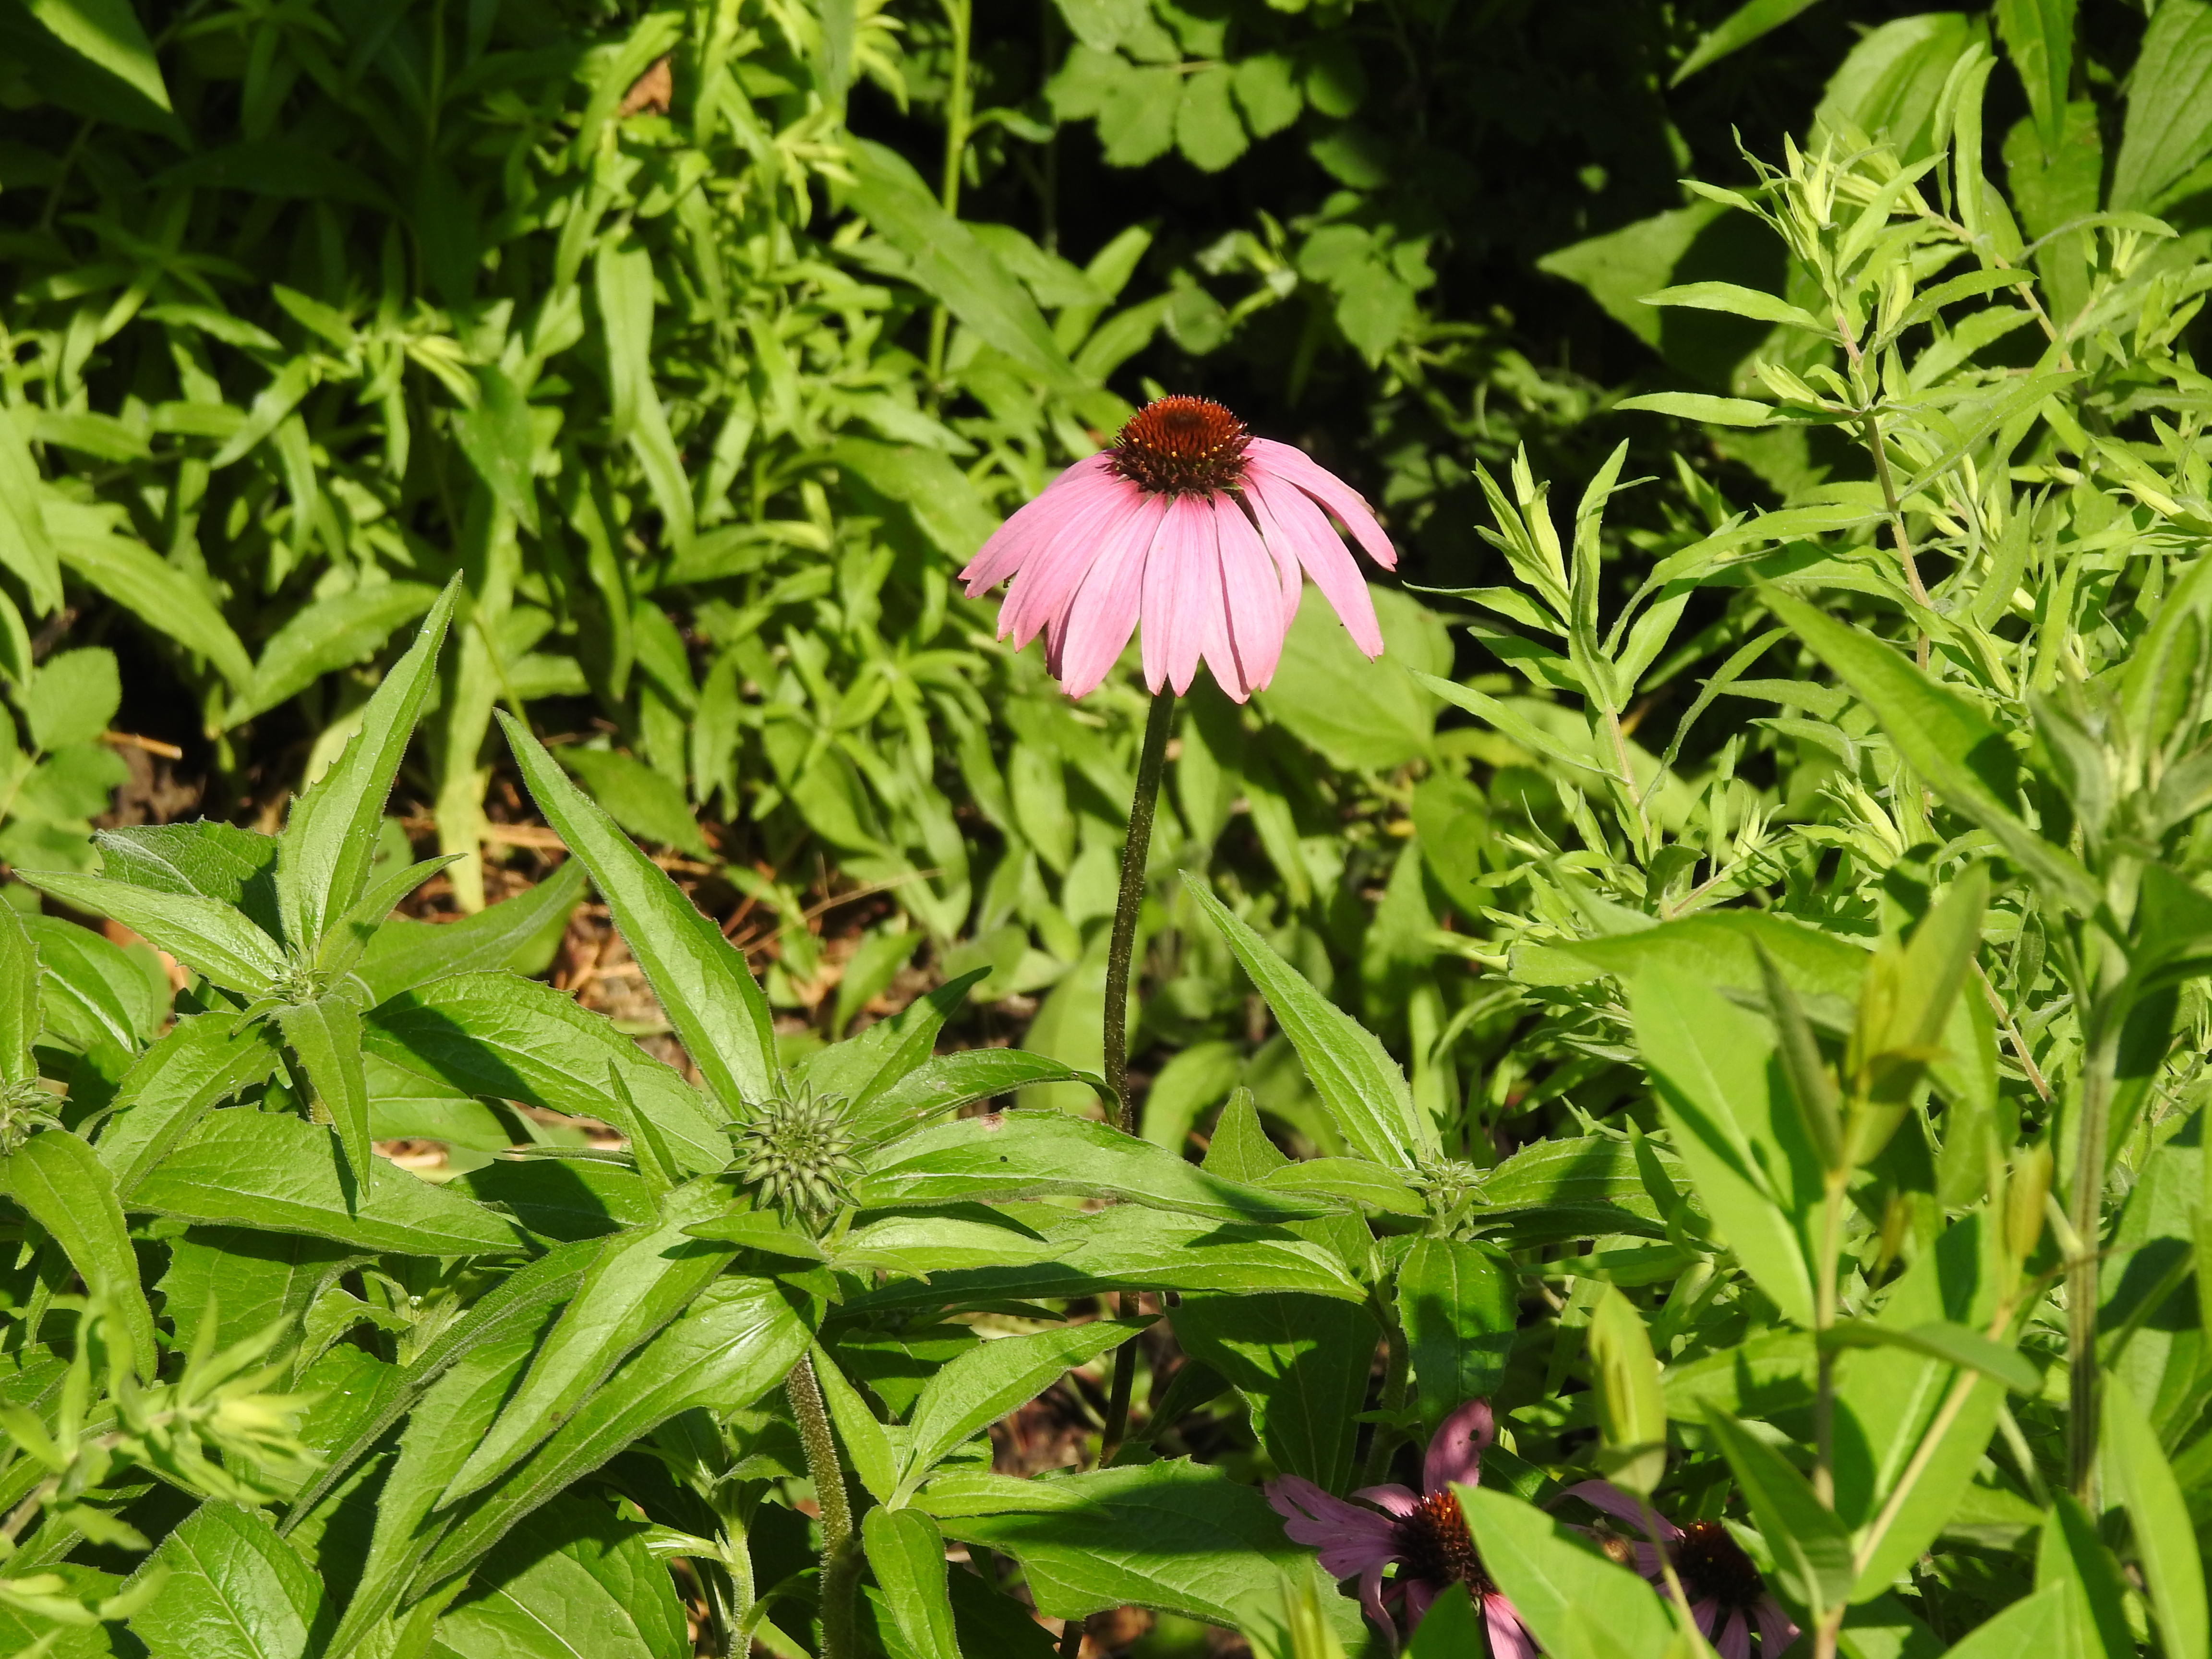 A pink-purple flower with a raised black center and green grass in the background